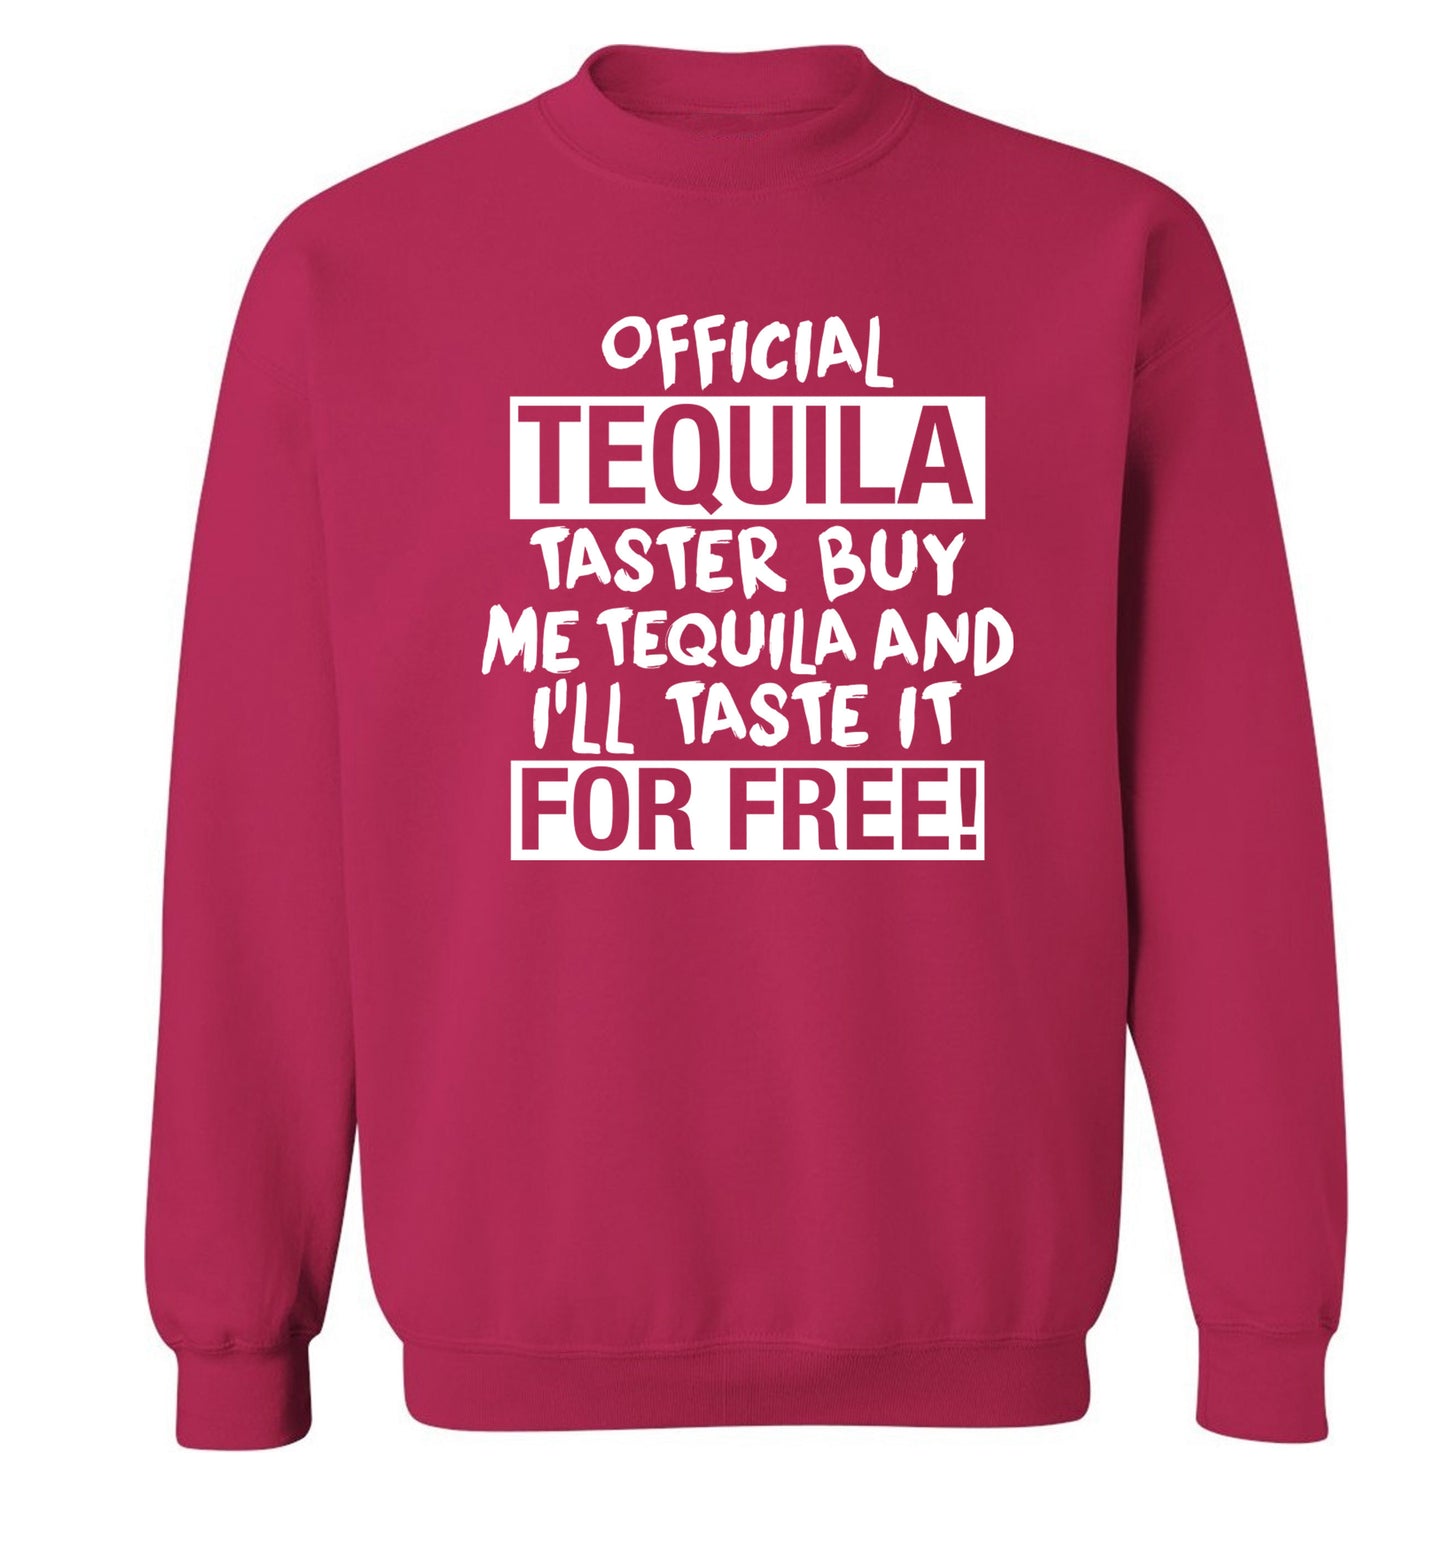 Official tequila taster buy me tequila and I'll taste it for free Adult's unisex pink Sweater 2XL